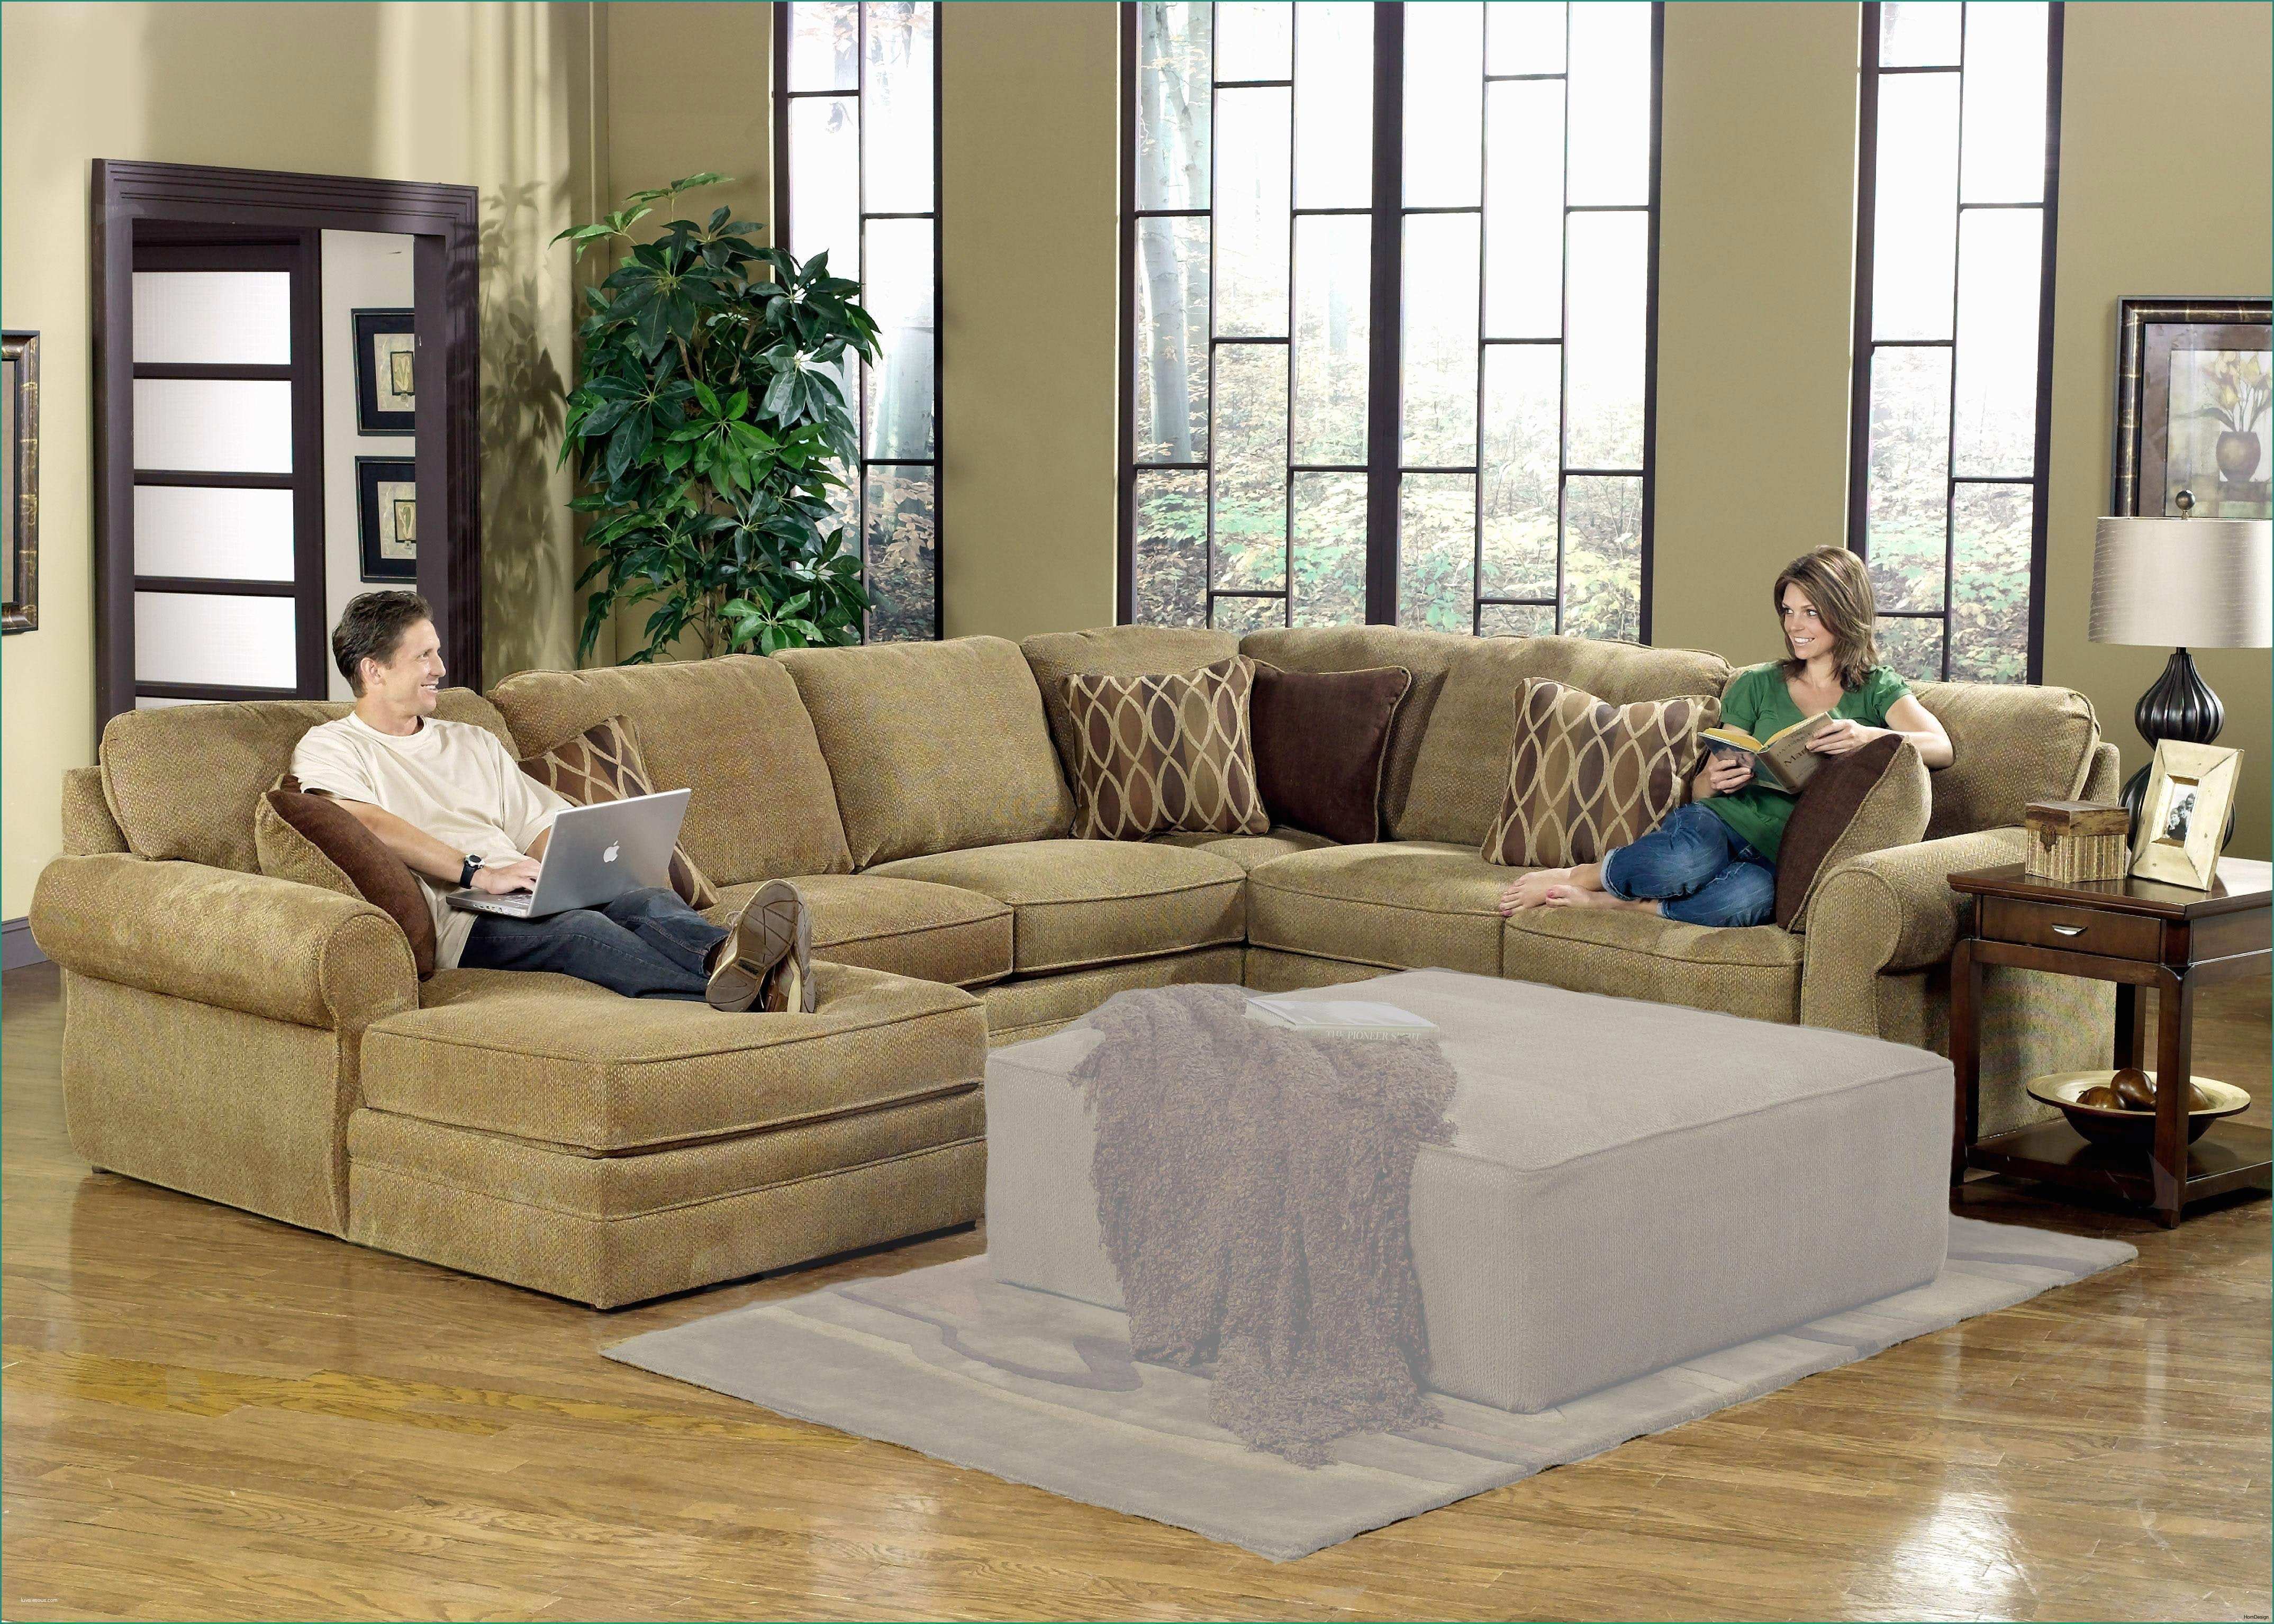 Chaise Longue Divano E Sectional sofas with Chaise Lounge Coolest U Shaped Sectionals Home